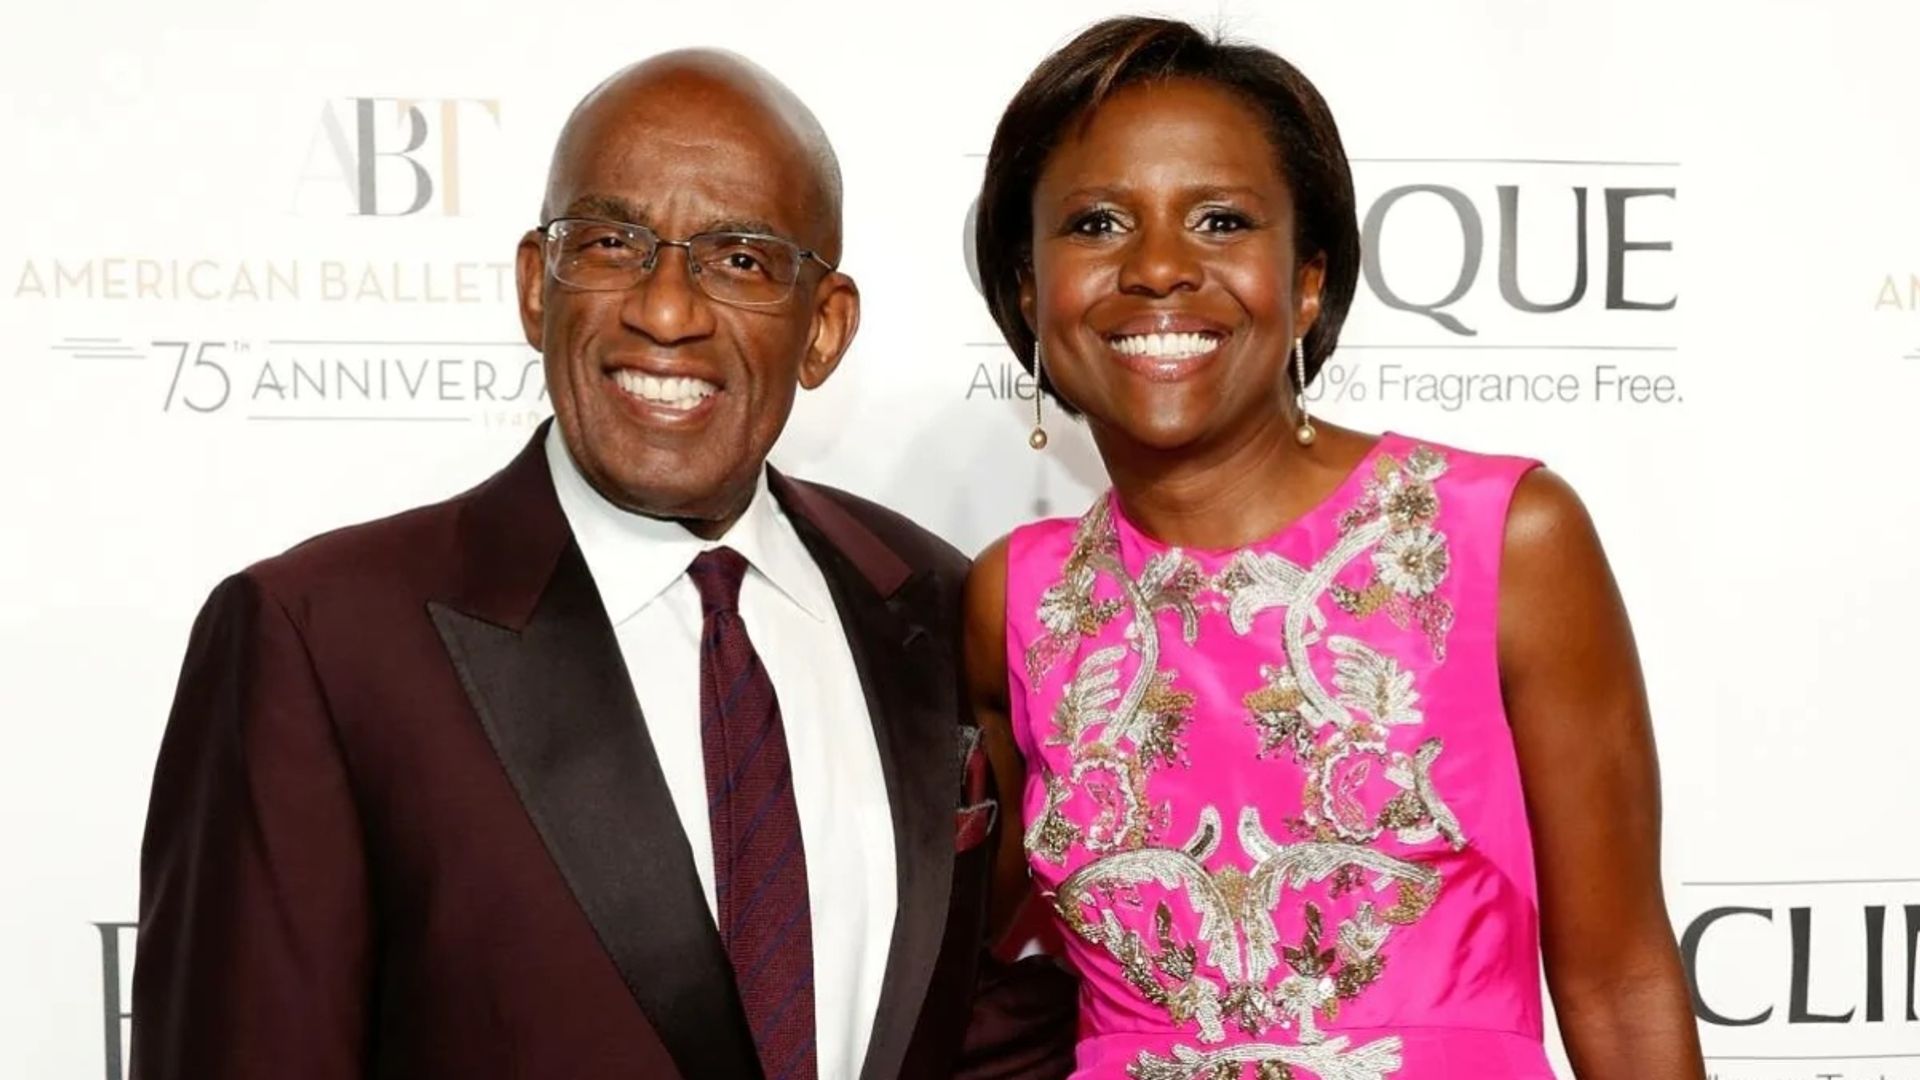 Today host Al Roker opens up about cancer battle